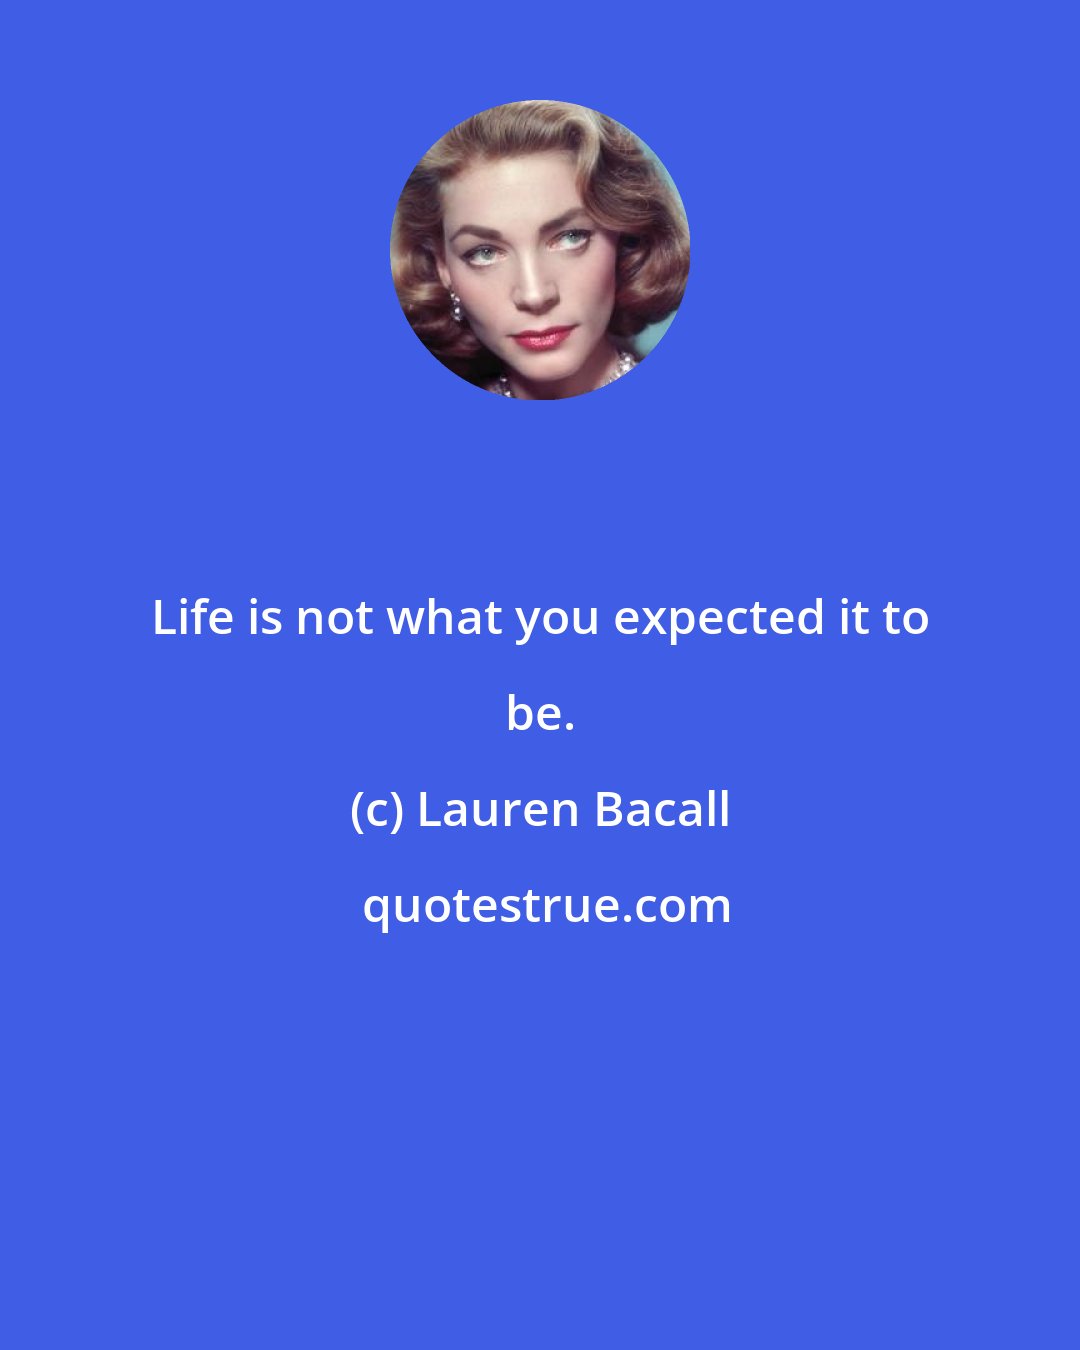 Lauren Bacall: Life is not what you expected it to be.